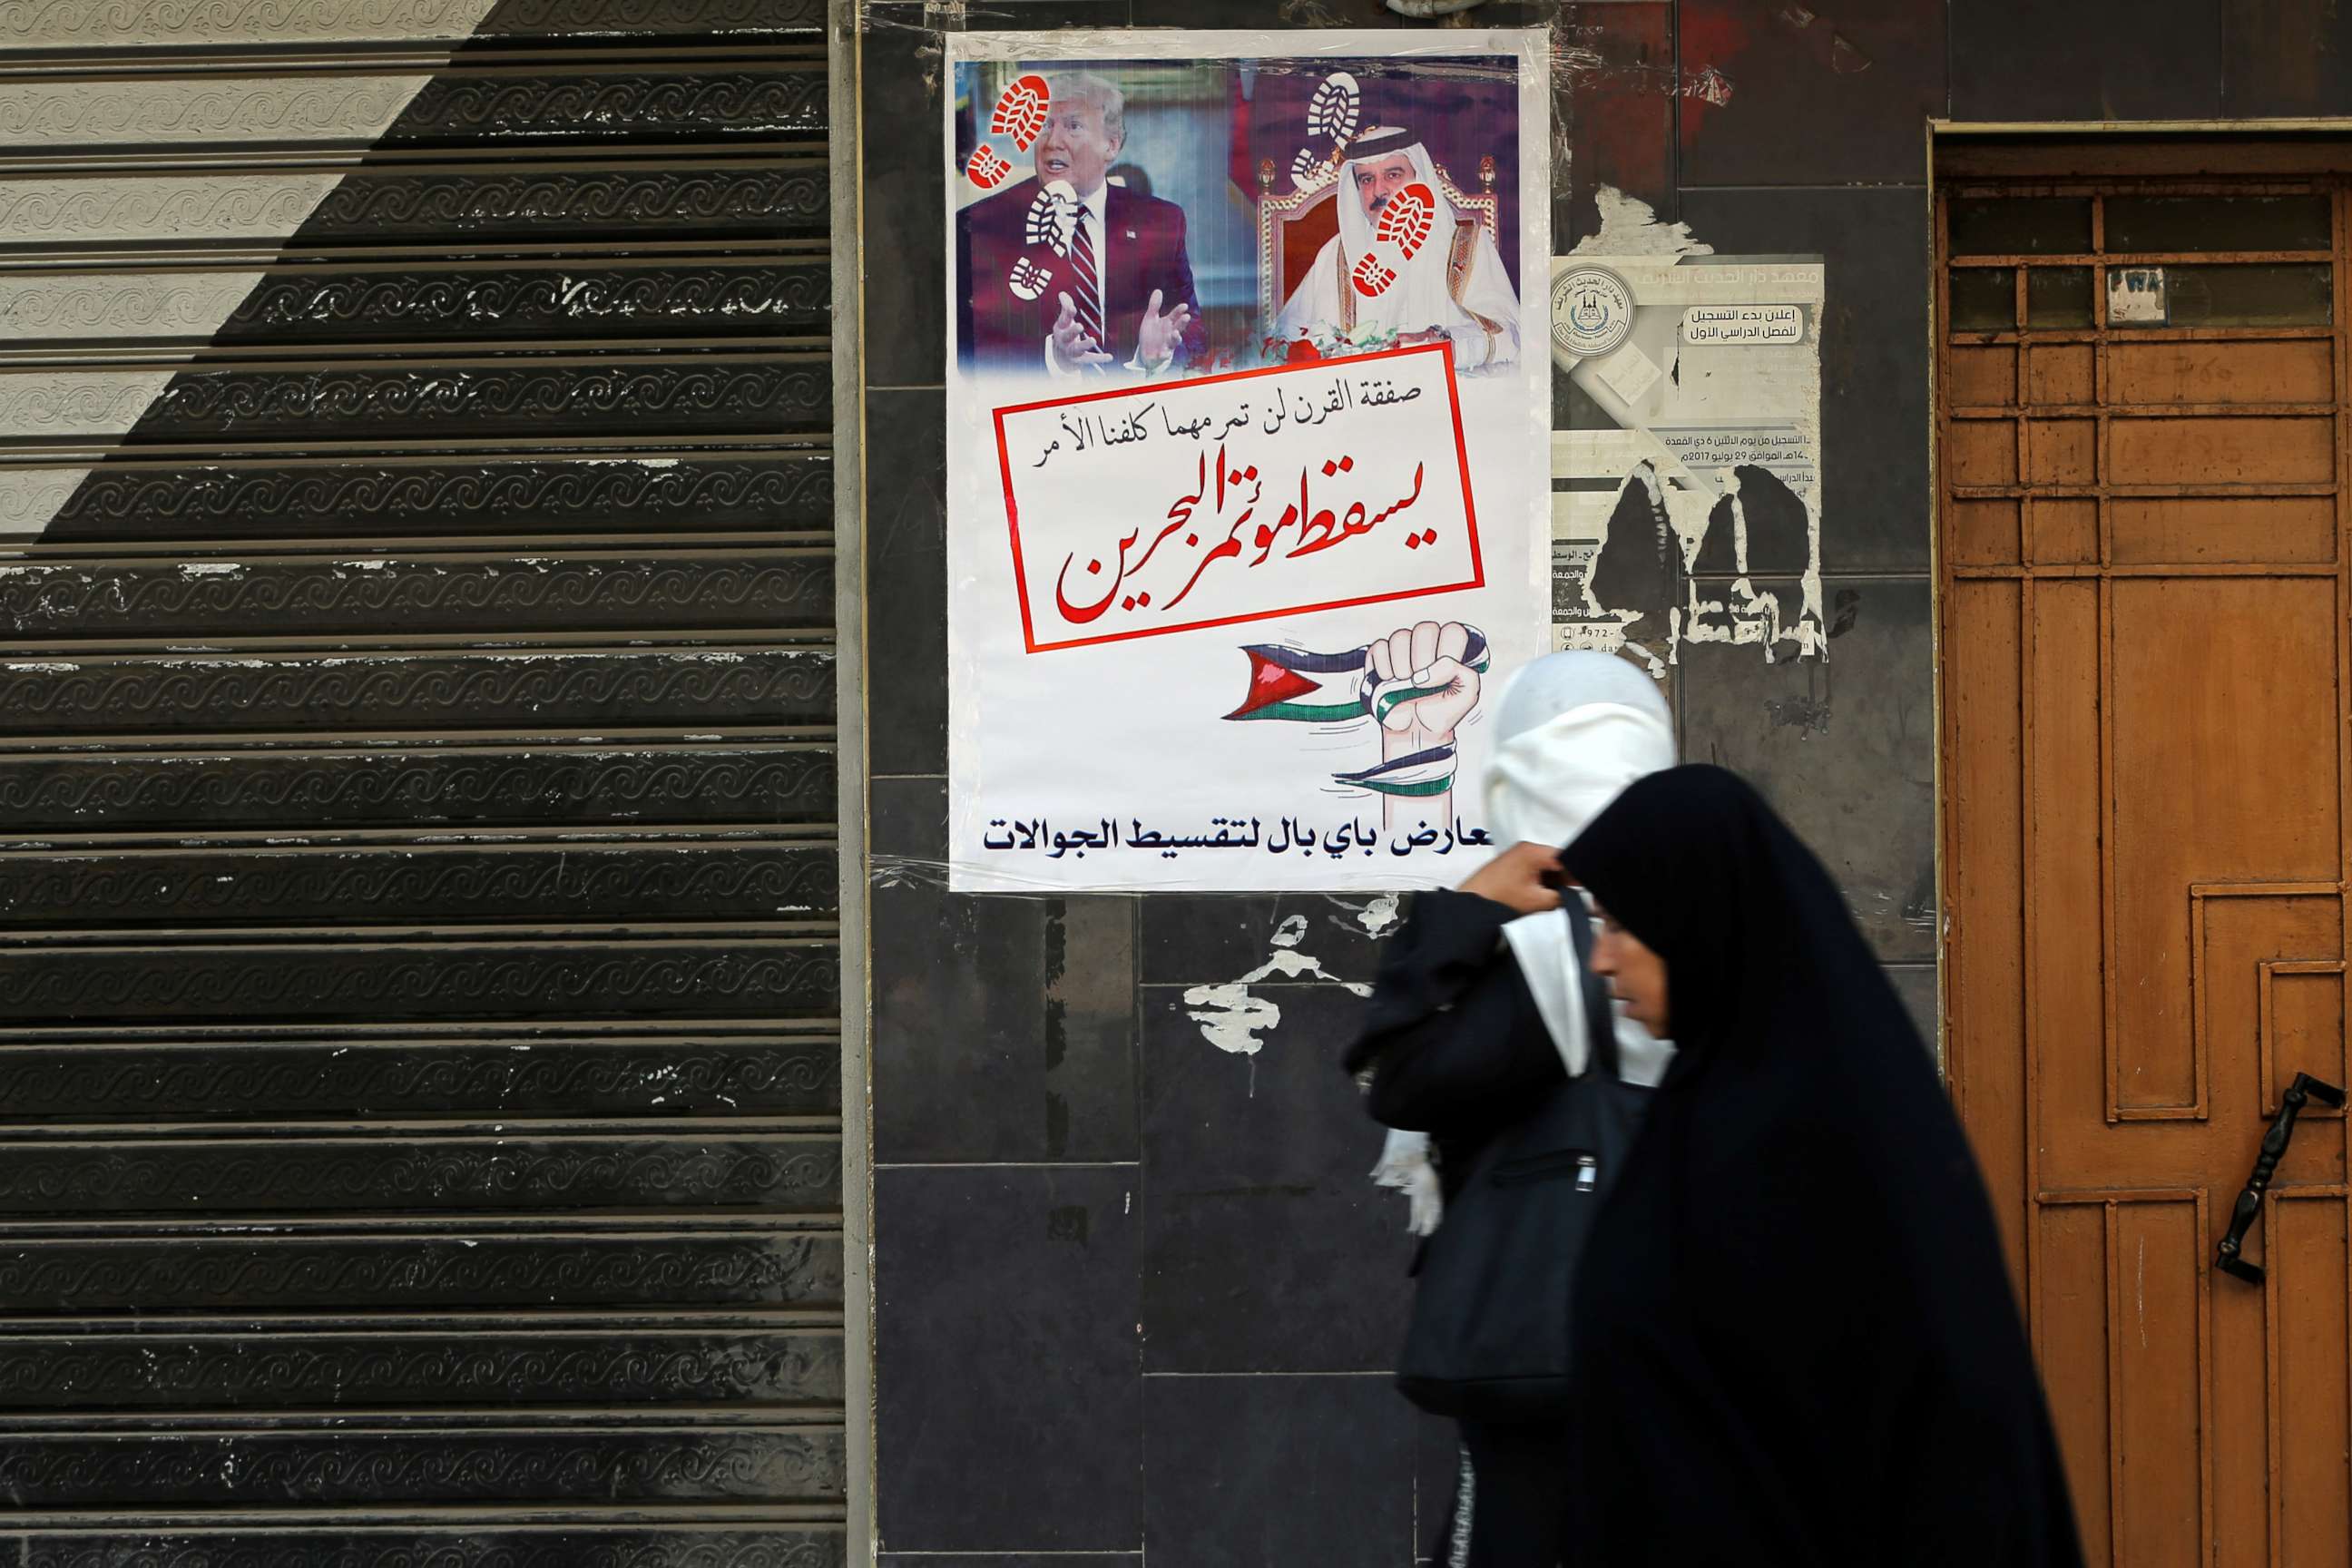 PHOTO: Women walk past banners showing pictures of Bahrain's King Hamad bin Isa Al Khalifa and U.S. President Donald Trump, reading "down with the Bahrain conference," in Khan Younis in the southern Gaza Strip, June 25, 2019.